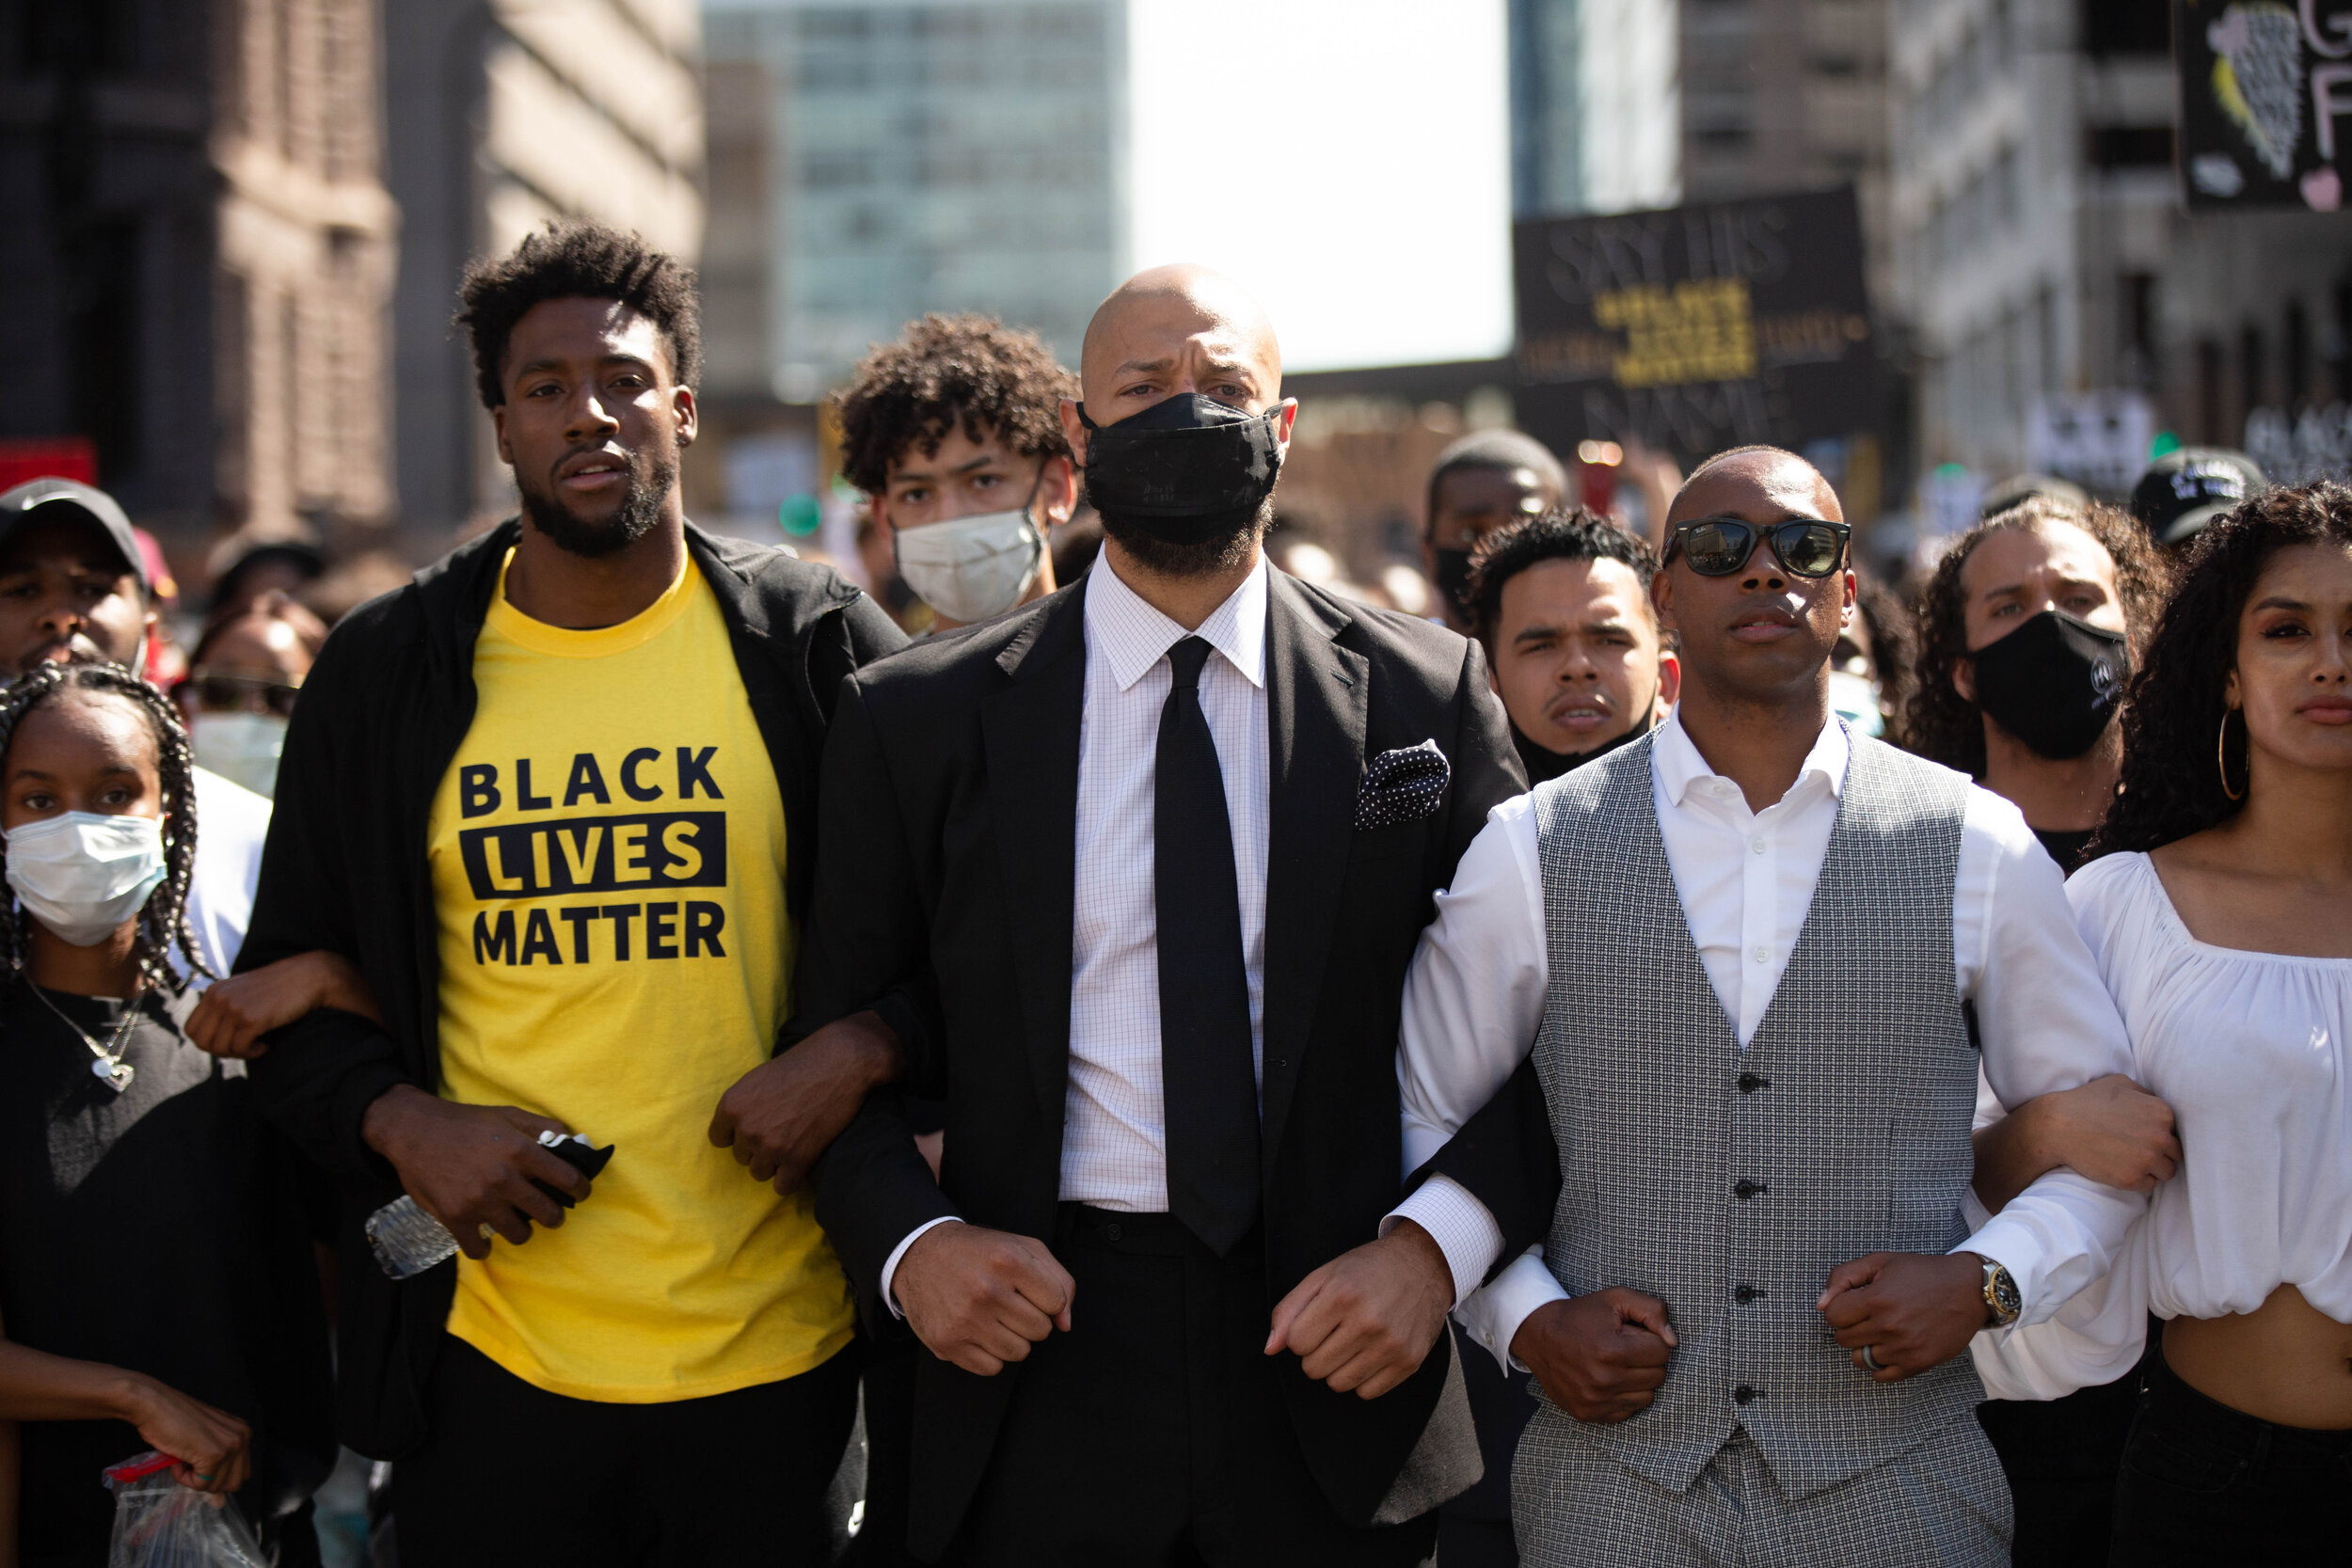  Athletes took the front of the line as they marched down 3rd Ave S in Minneapolis during a protest over the police killing of George Floyd on May 31. 